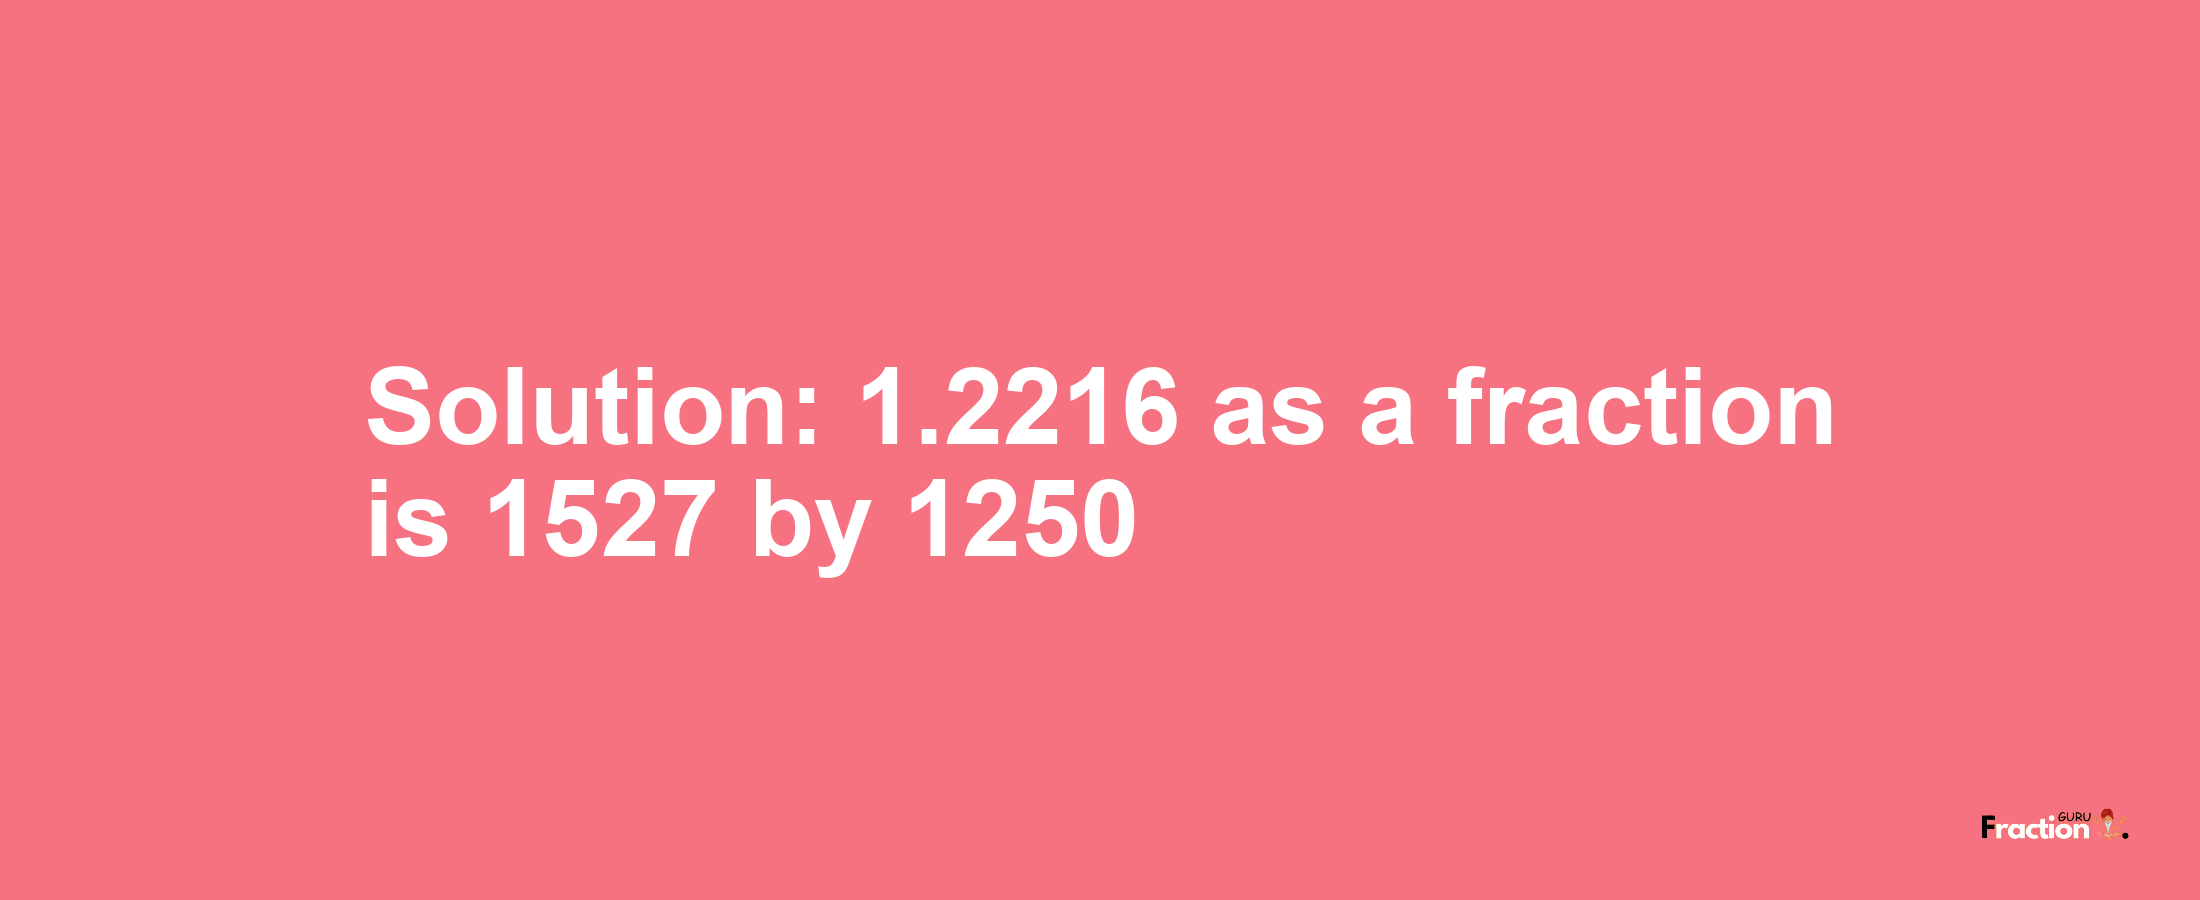 Solution:1.2216 as a fraction is 1527/1250